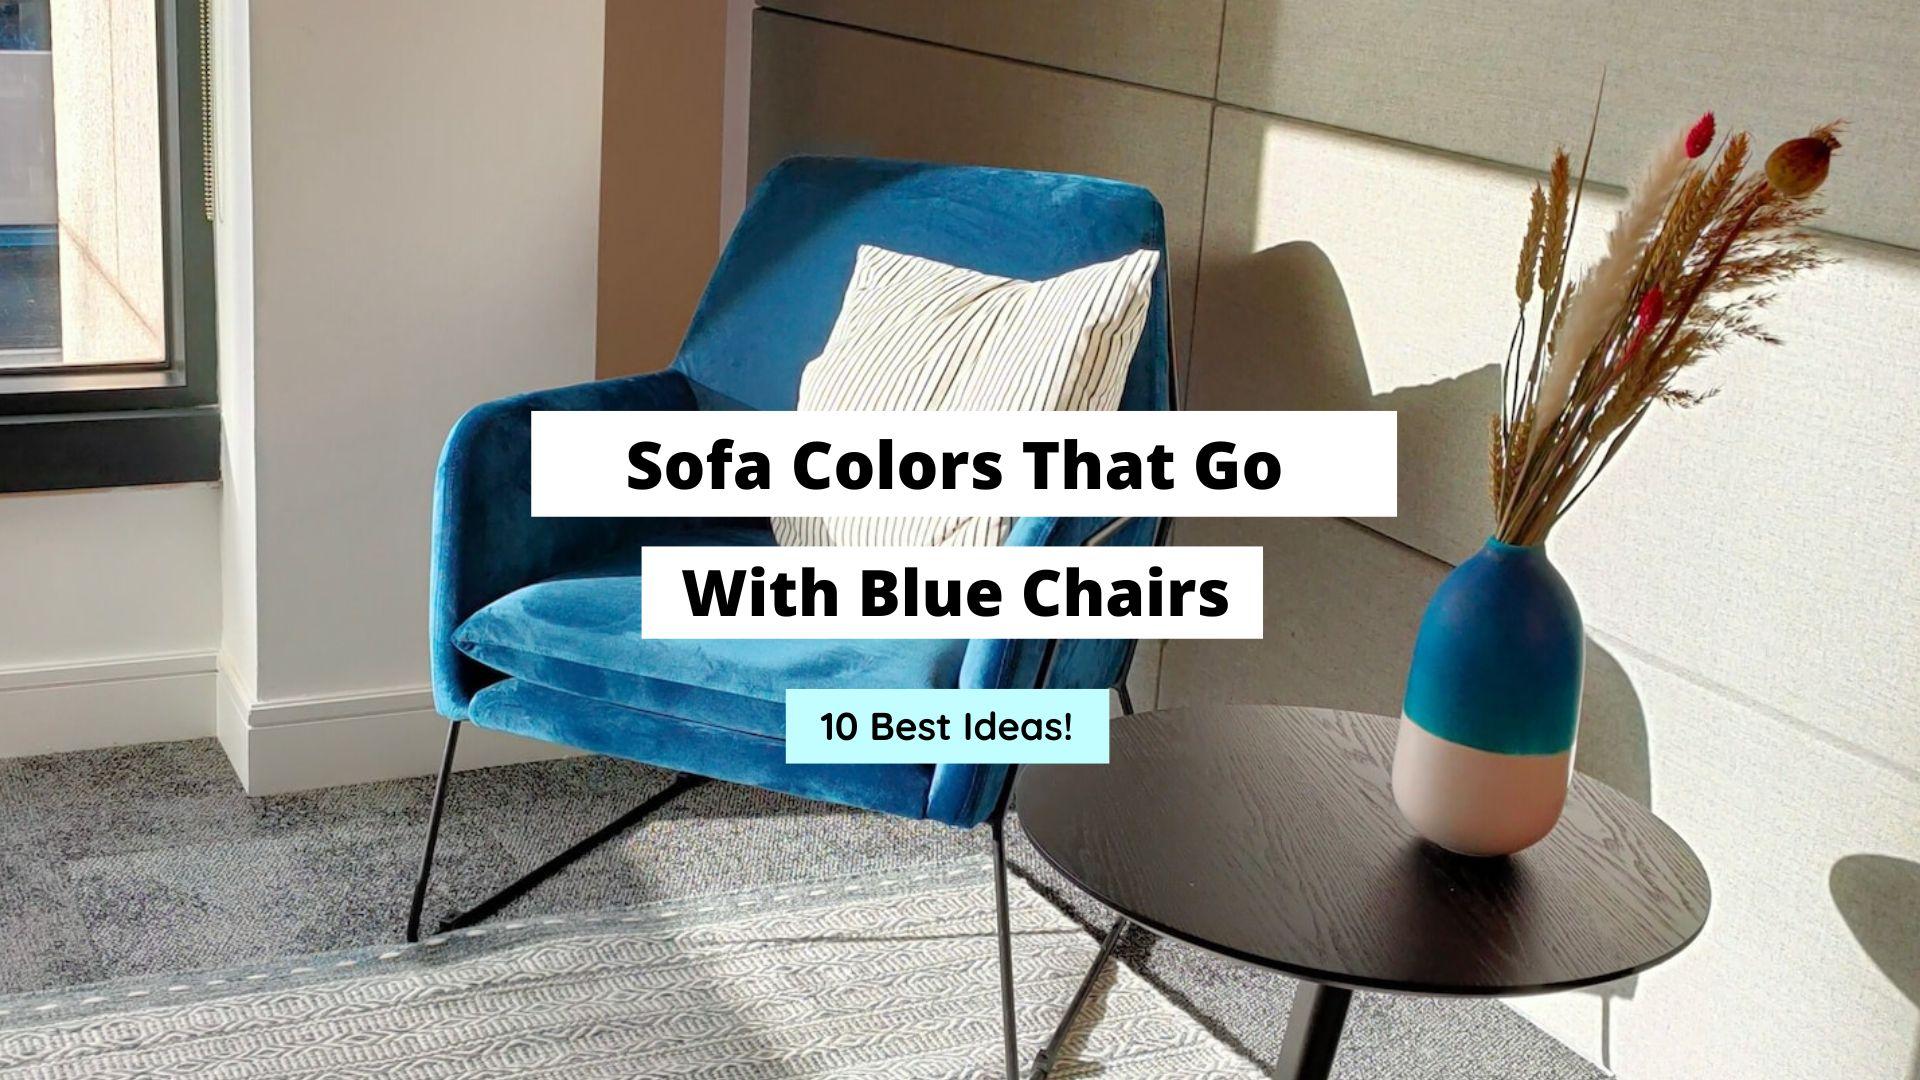 10 Elegant Sofa Colors That Go With Blue Chairs - Craftsonfire